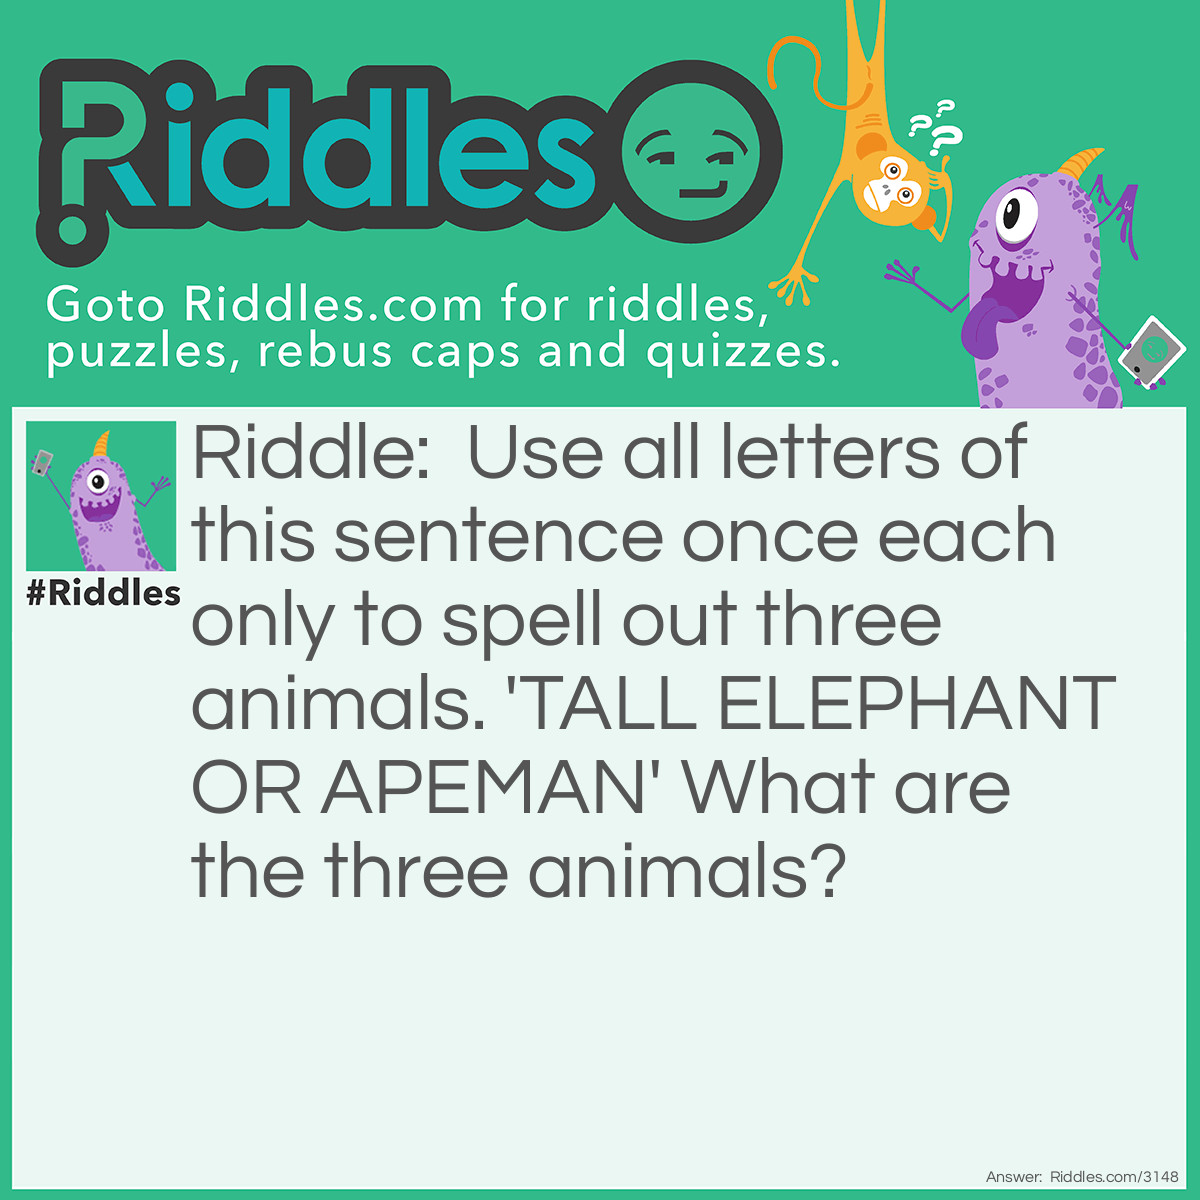 Riddle: Use all letters of this sentence once each only to spell out three animals. 
'TALL ELEPHANT OR APEMAN' 
What are the three animals? Answer: PANTHER, ANTELOPE, LLAMA